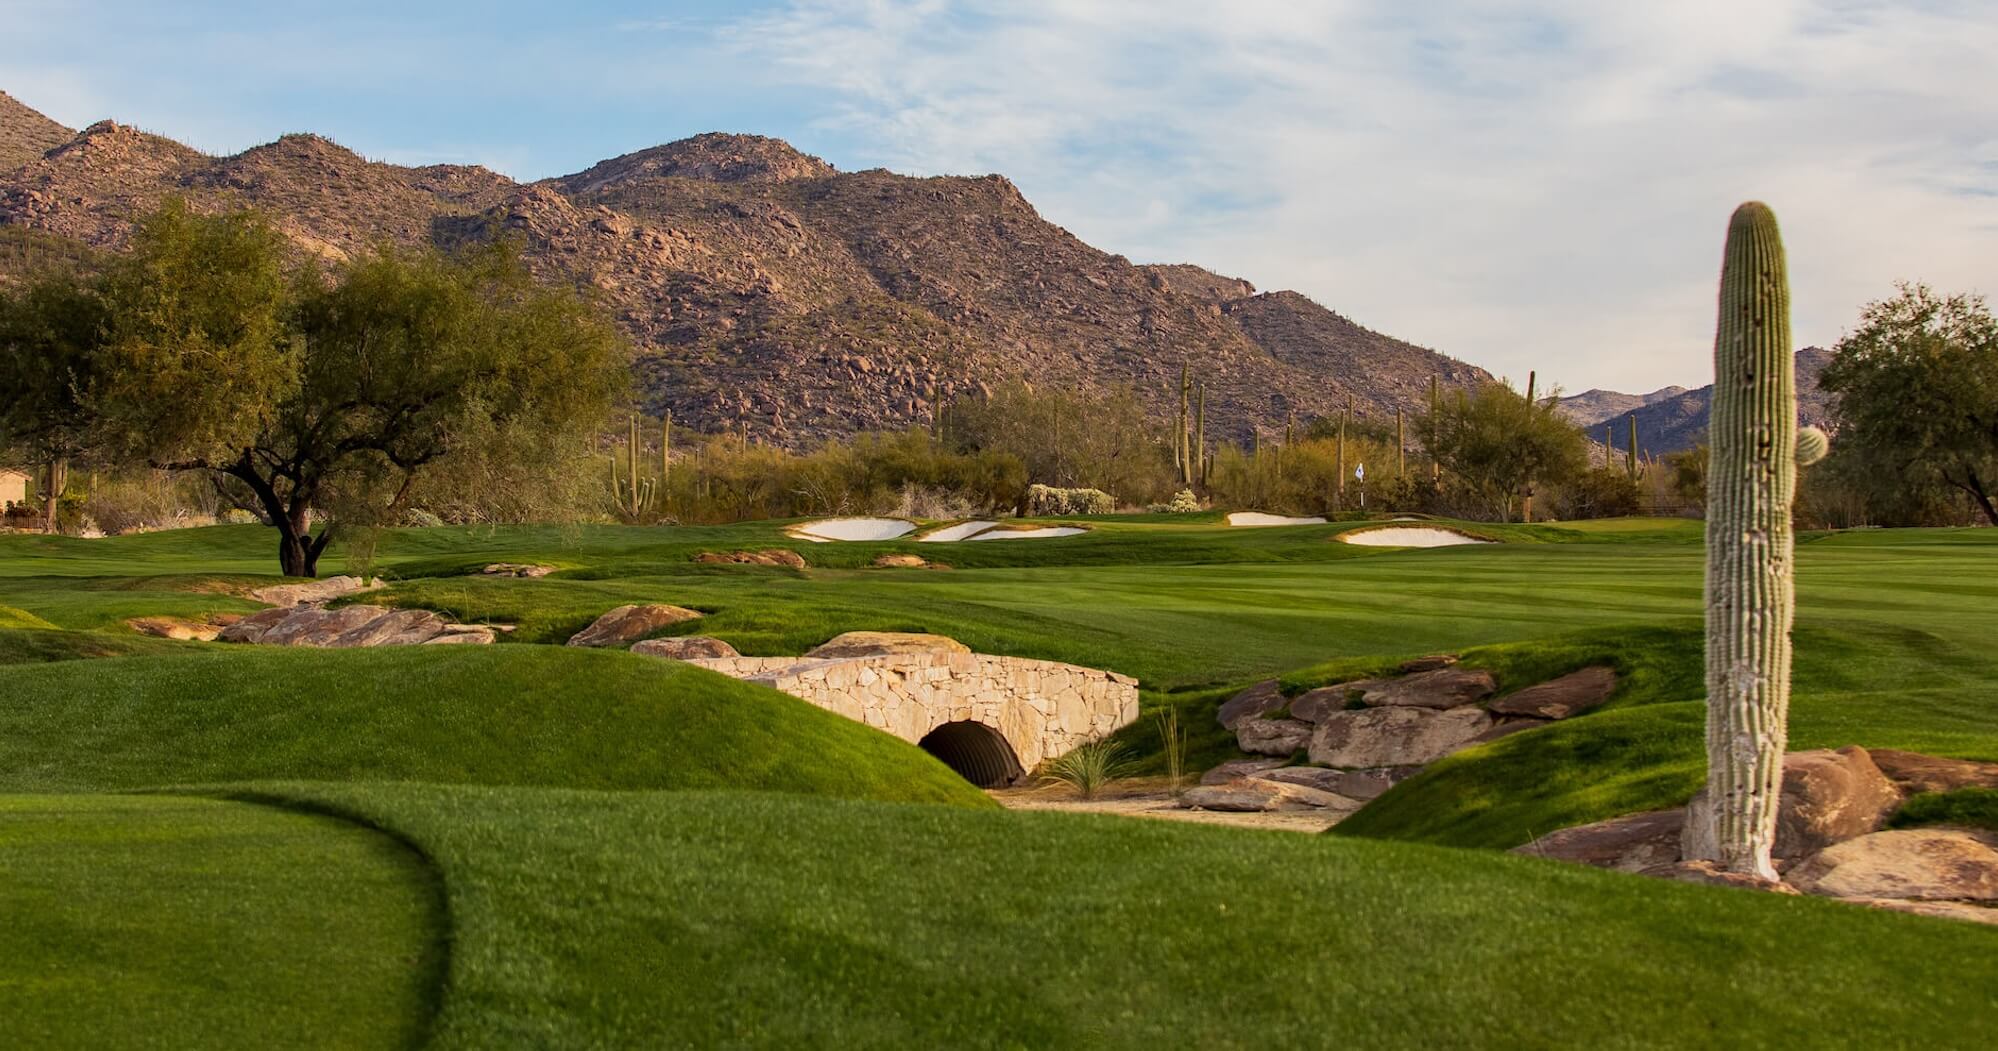 Clubs of Dove Mountain